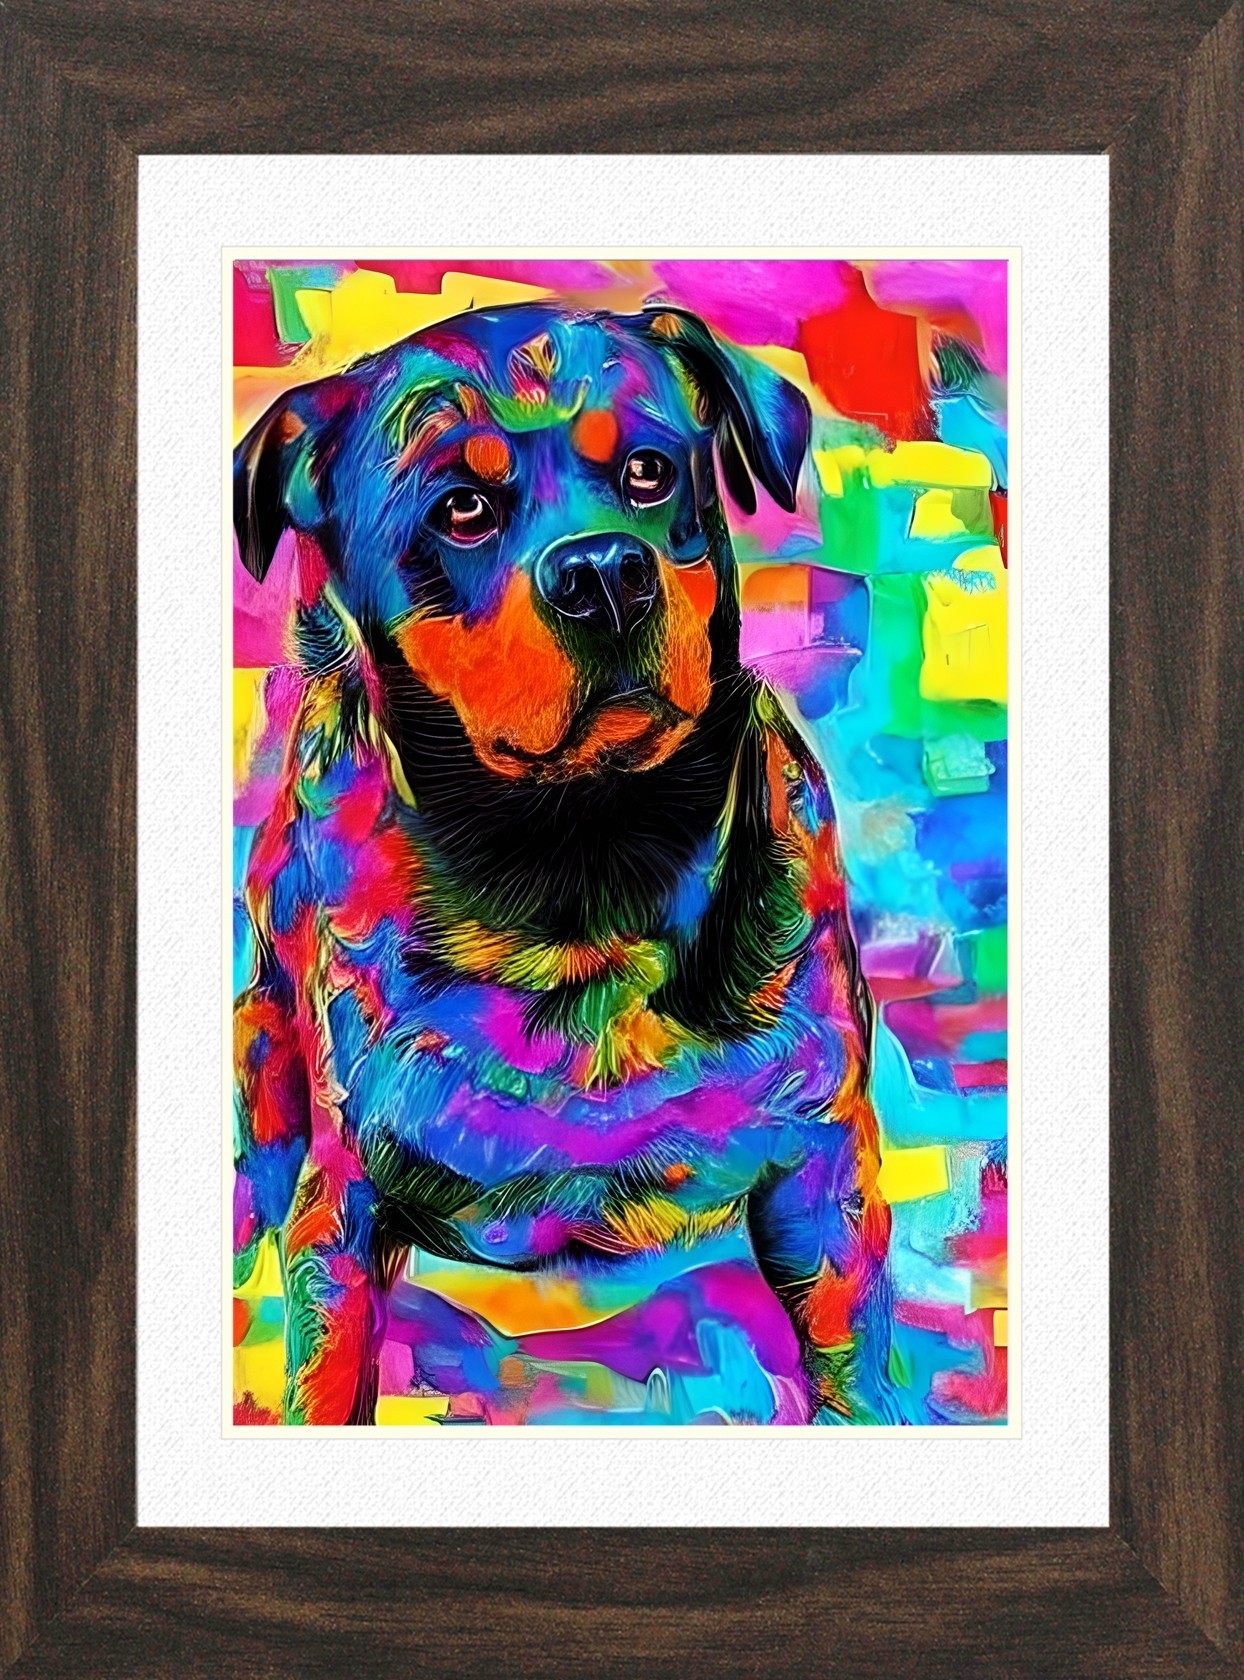 Rottweiler Dog Picture Framed Colourful Abstract Art (A4 Walnut Frame)